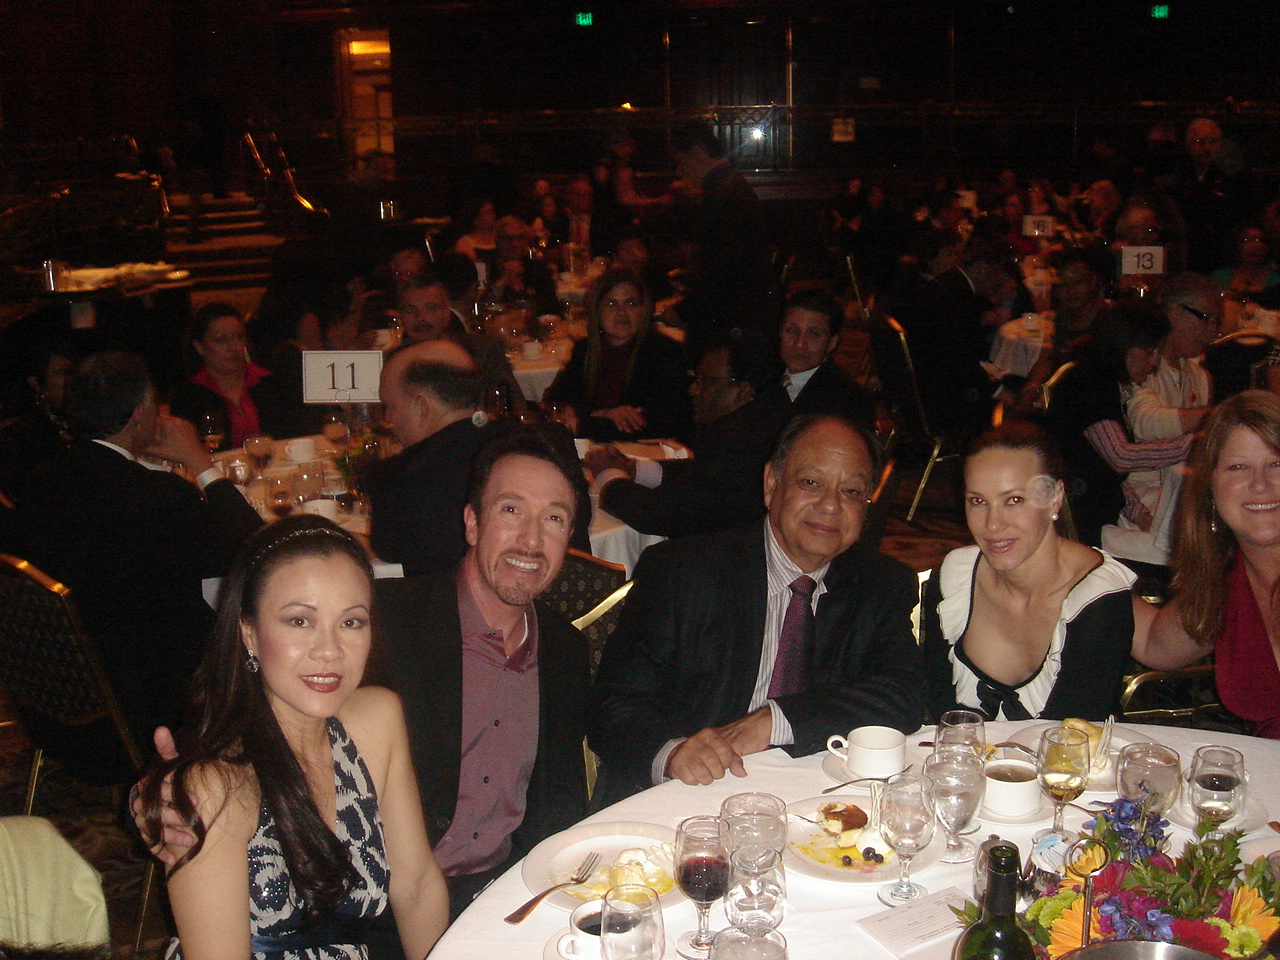 Aline and David with Cheech and Natasha at the Cesar Chavez Awards where Cheech received the award for his humanitarian work.